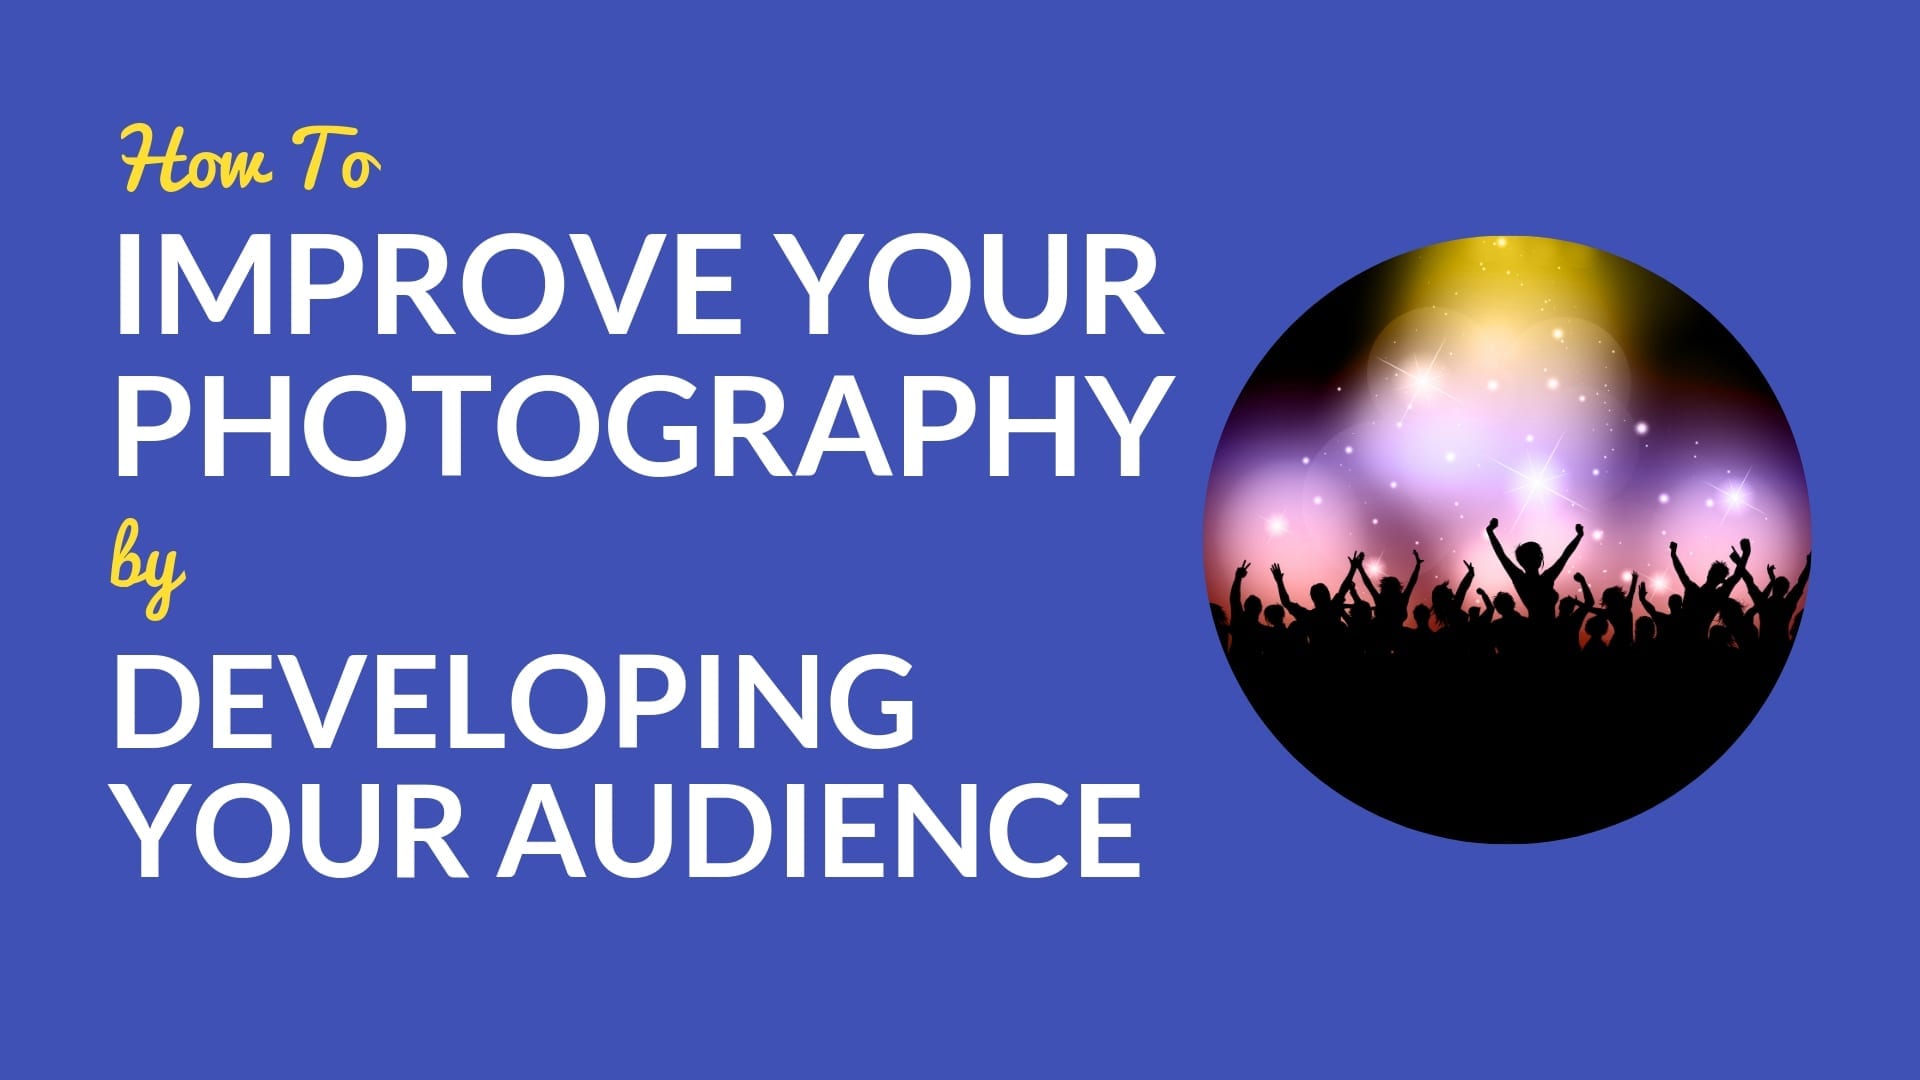 How to Improve Your Photography by Developing Your Audience